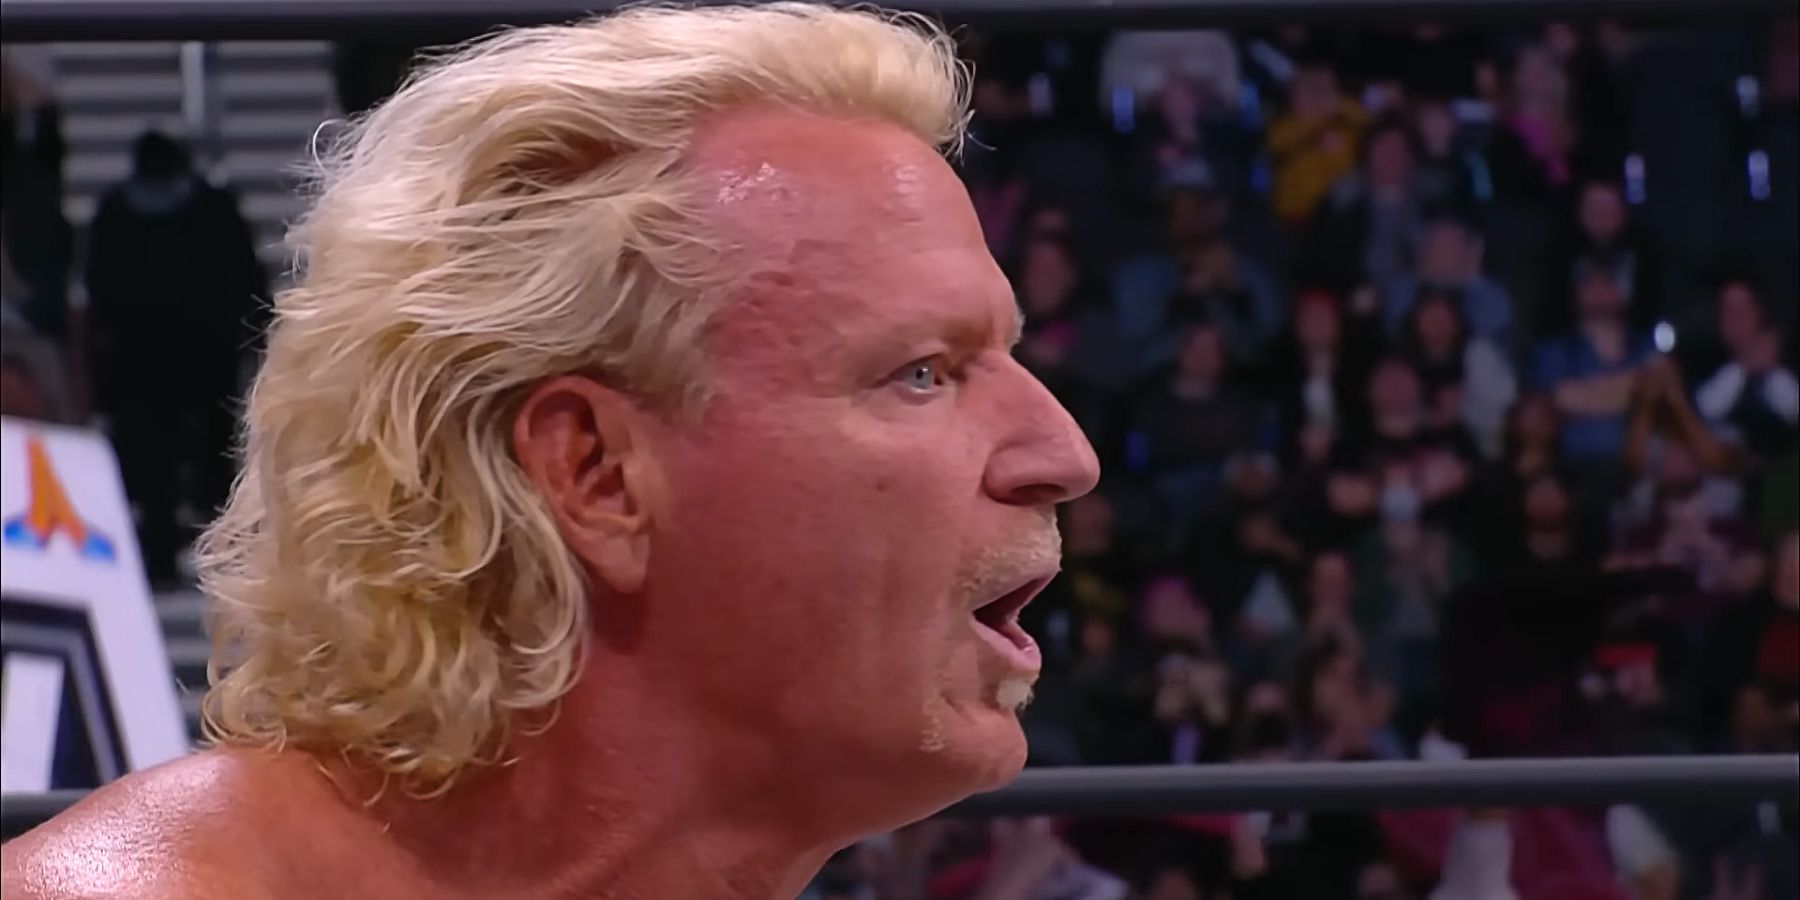 Jeff Jarrett responds to losing a match for the AEW tag-team titles early in 2023.